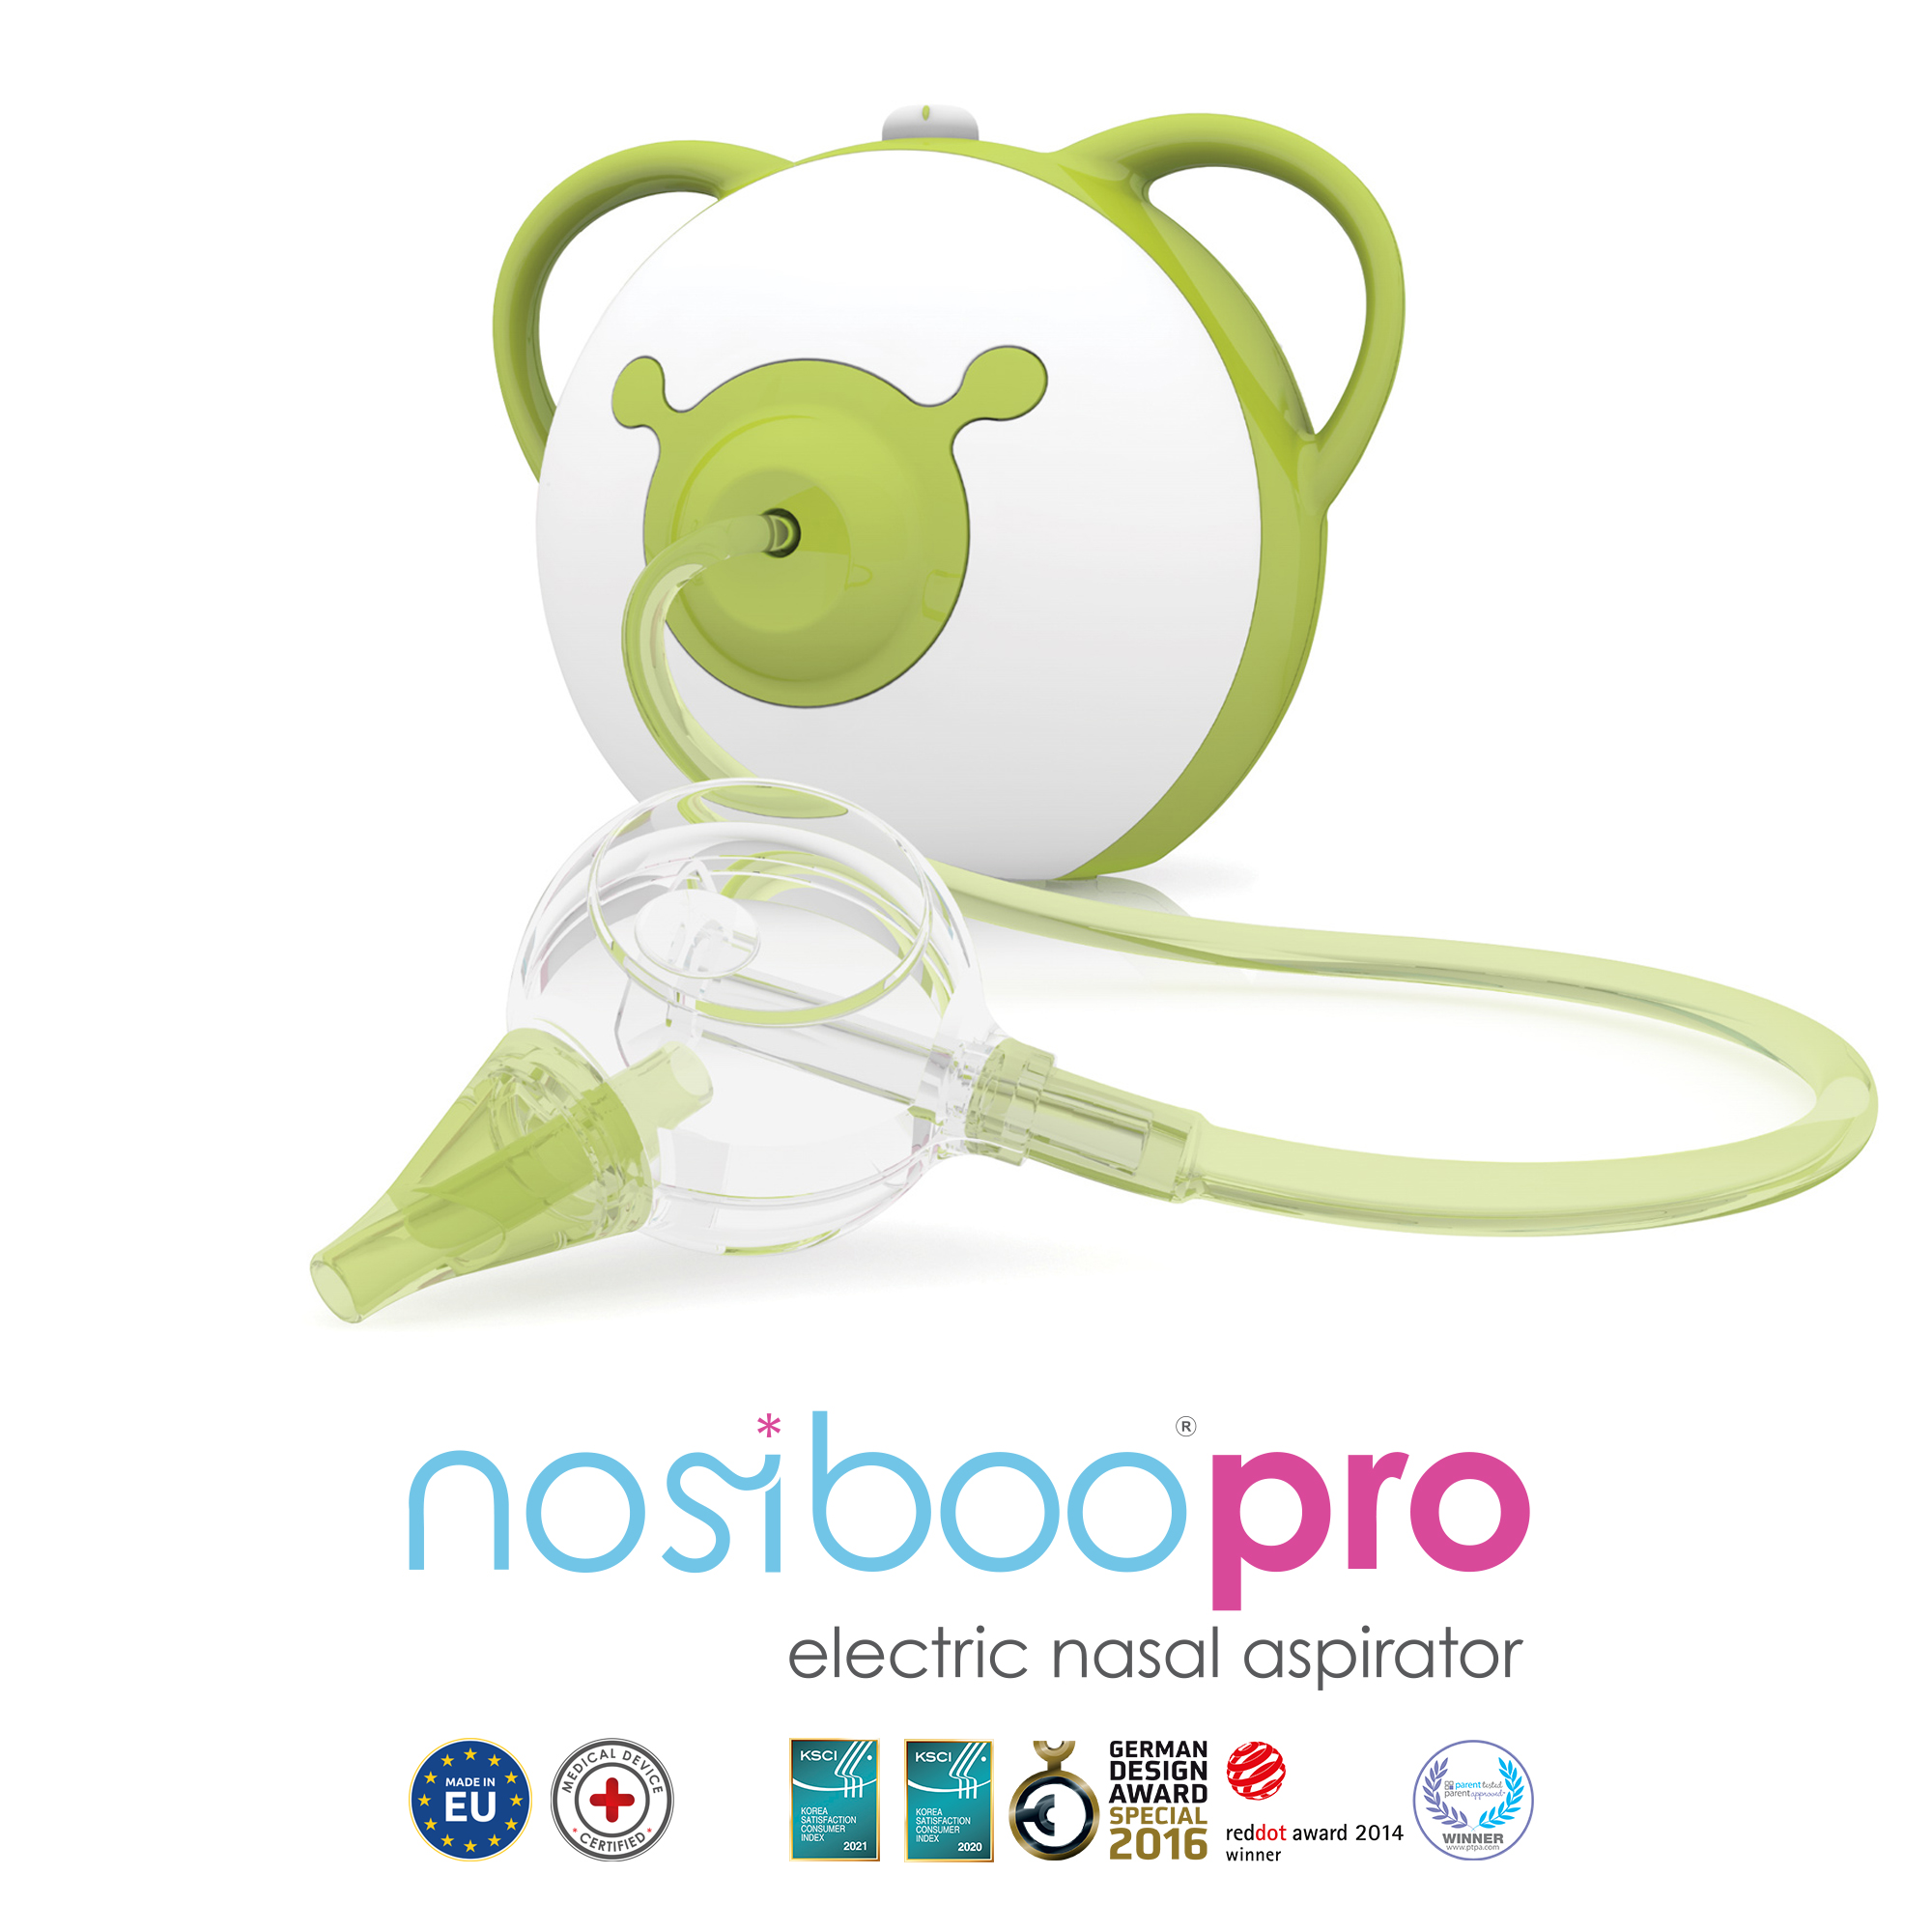 nosiboo - Replacement pack for electric nasal aspirator Pro2